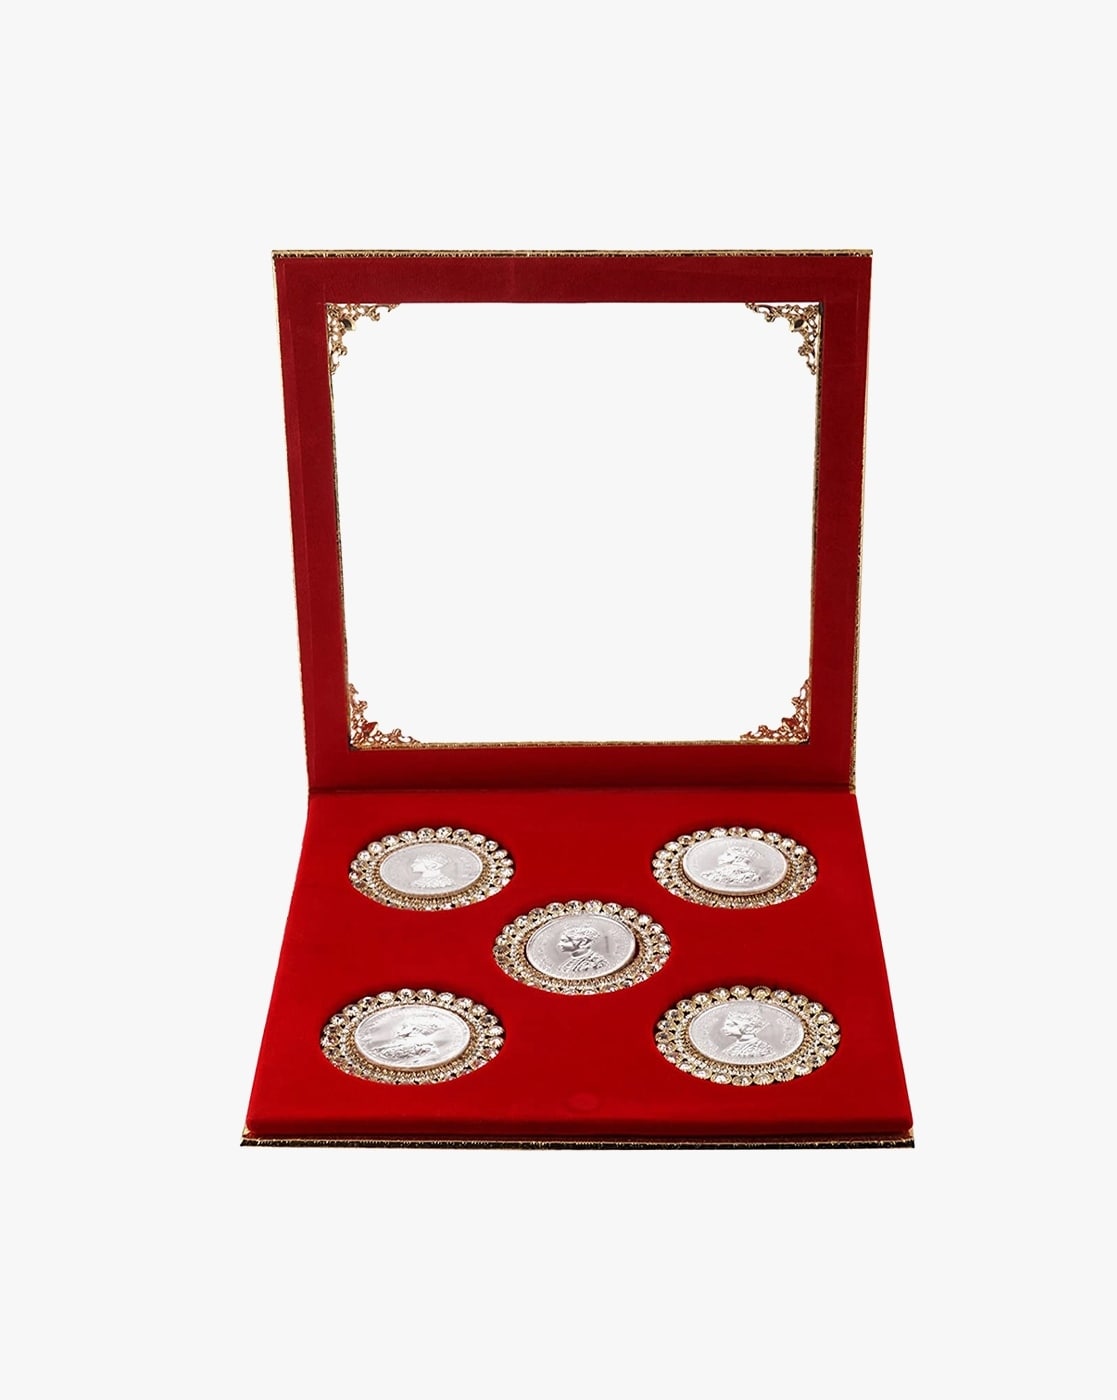 Buy LBV Lakshmi Ji Silver coin | 1 gm 999 Purity BIS Hallmark | With  Gangajal Bottle and Round Tin Gift Box for Pooja, Festivals, Corporate,  Birthday Gift at Amazon.in